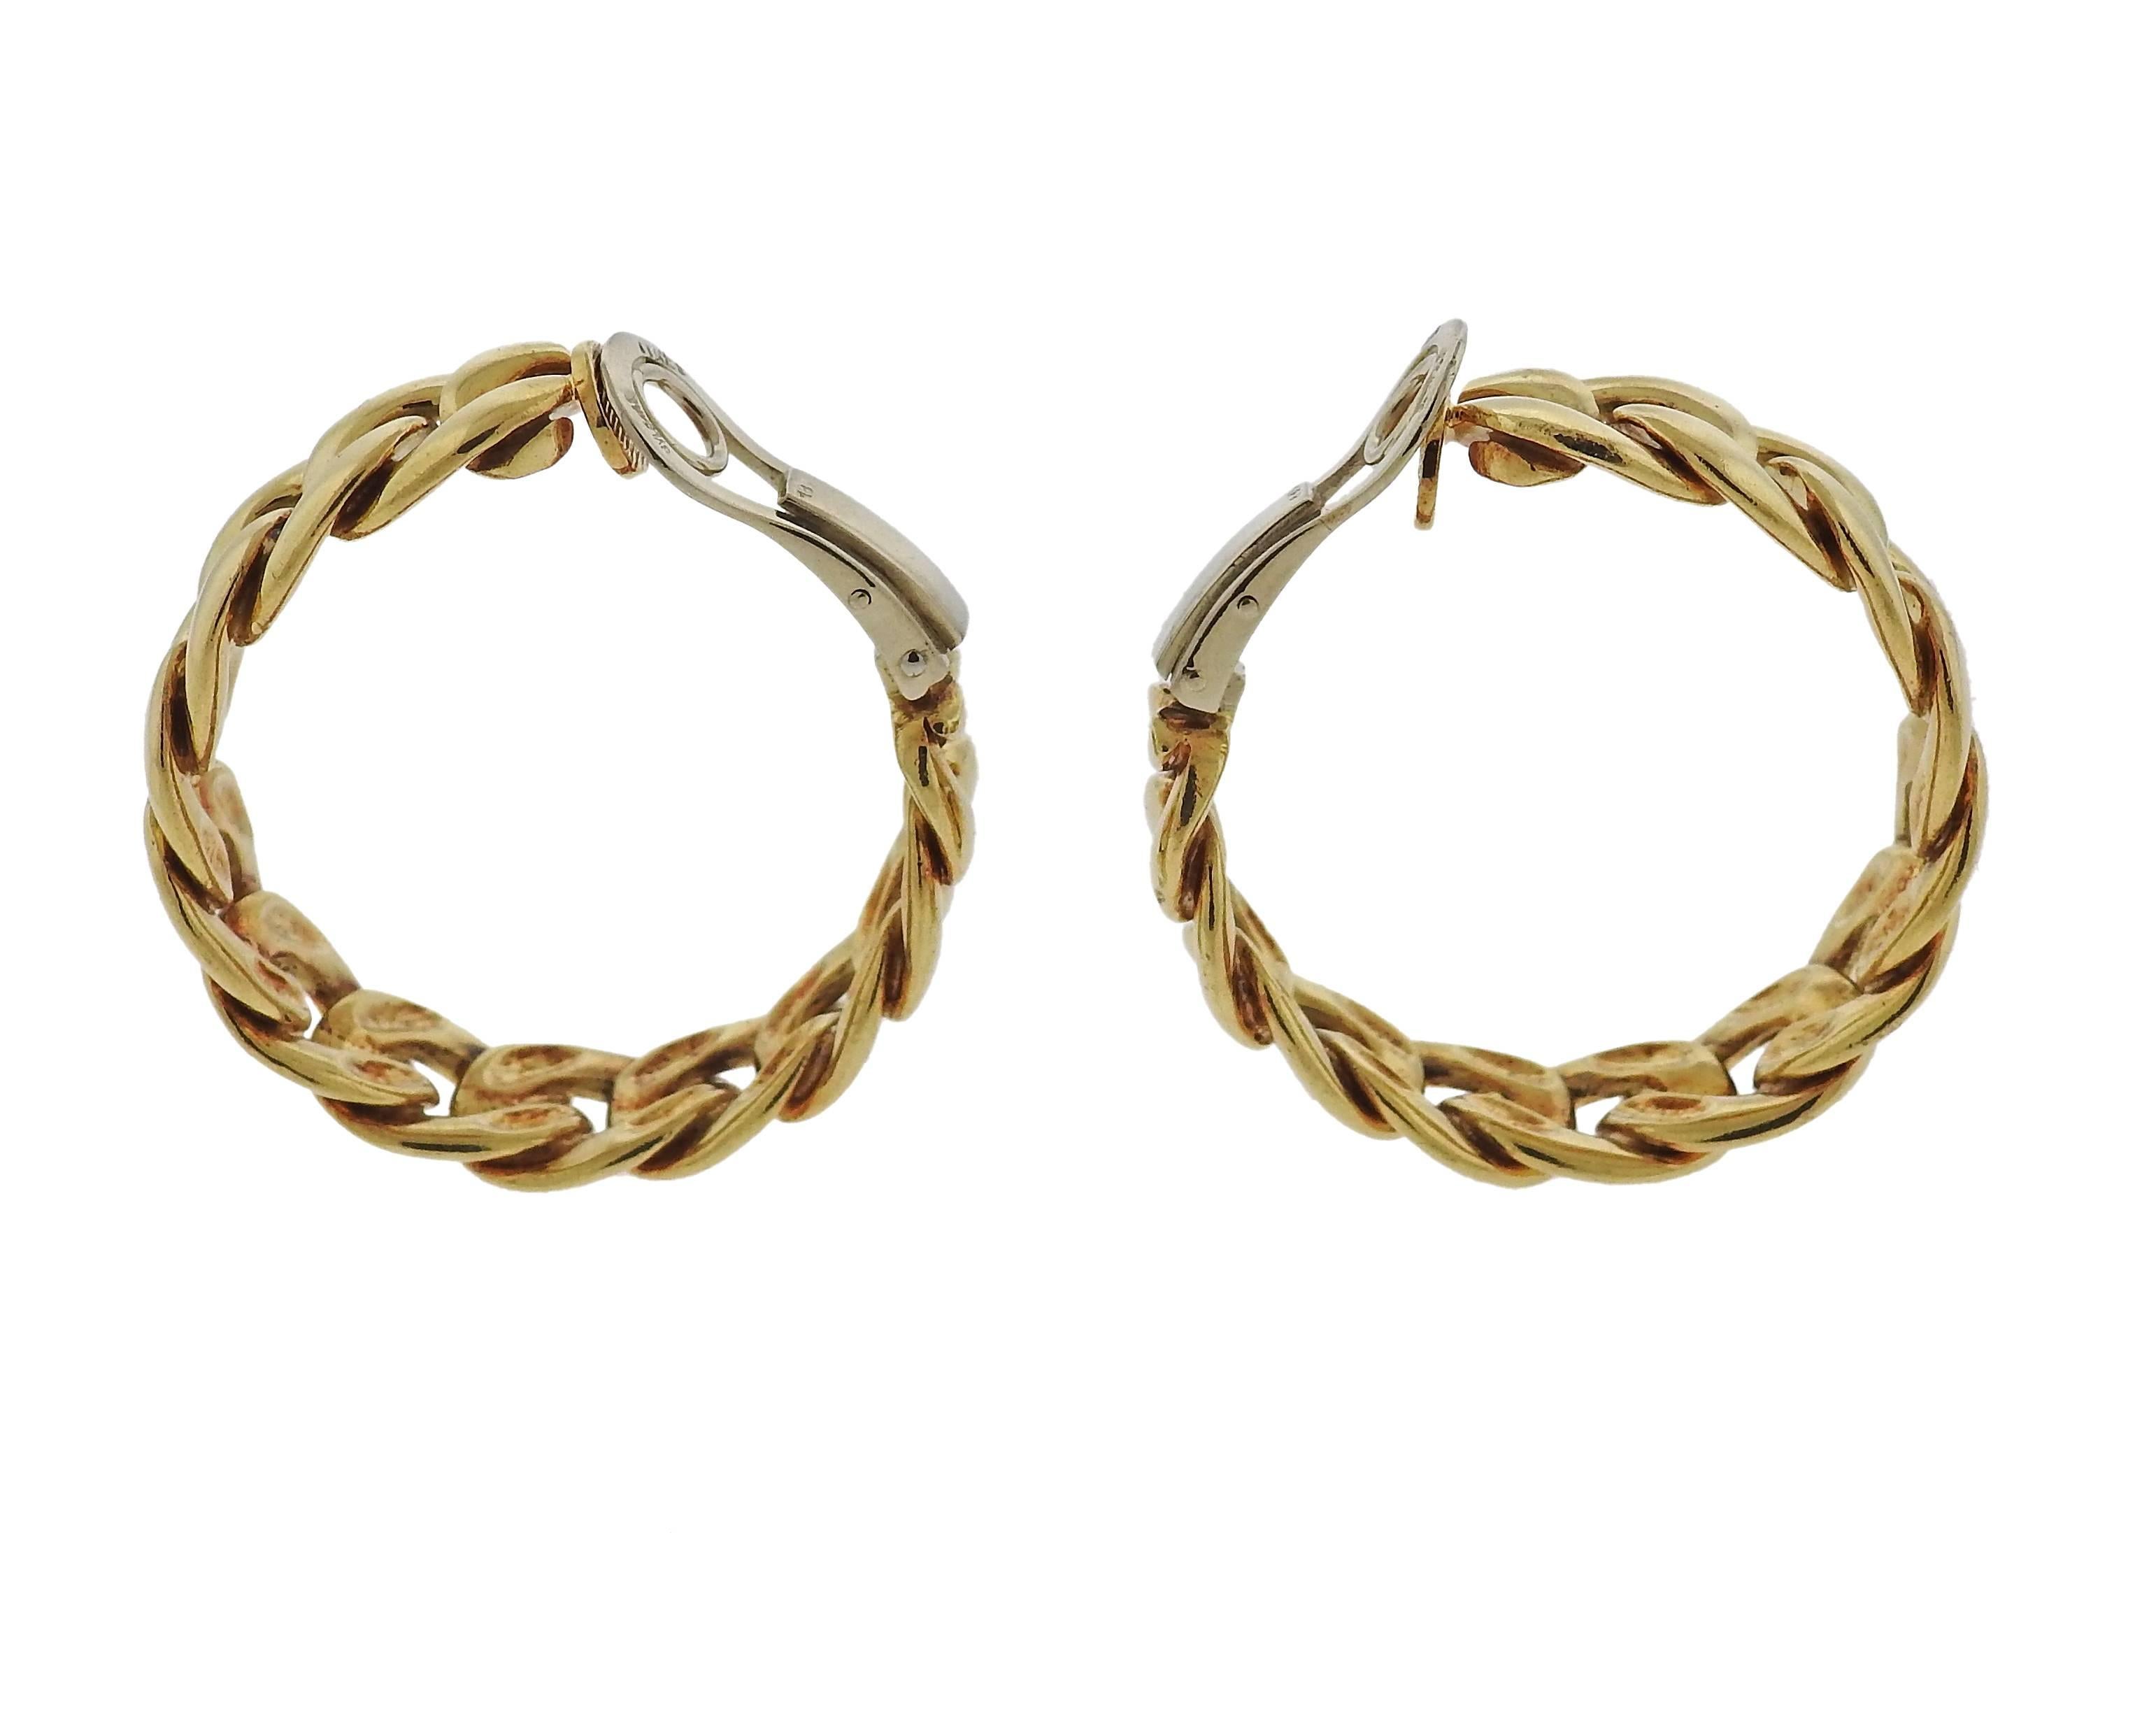 18k gold hop earrings, crafted by Bulgari, featuring curb link design. Earrings are 33mm in diameter and 10.5mm wide. Marked: Bvlgari, Italy, 18k and weigh 43.5 grams 